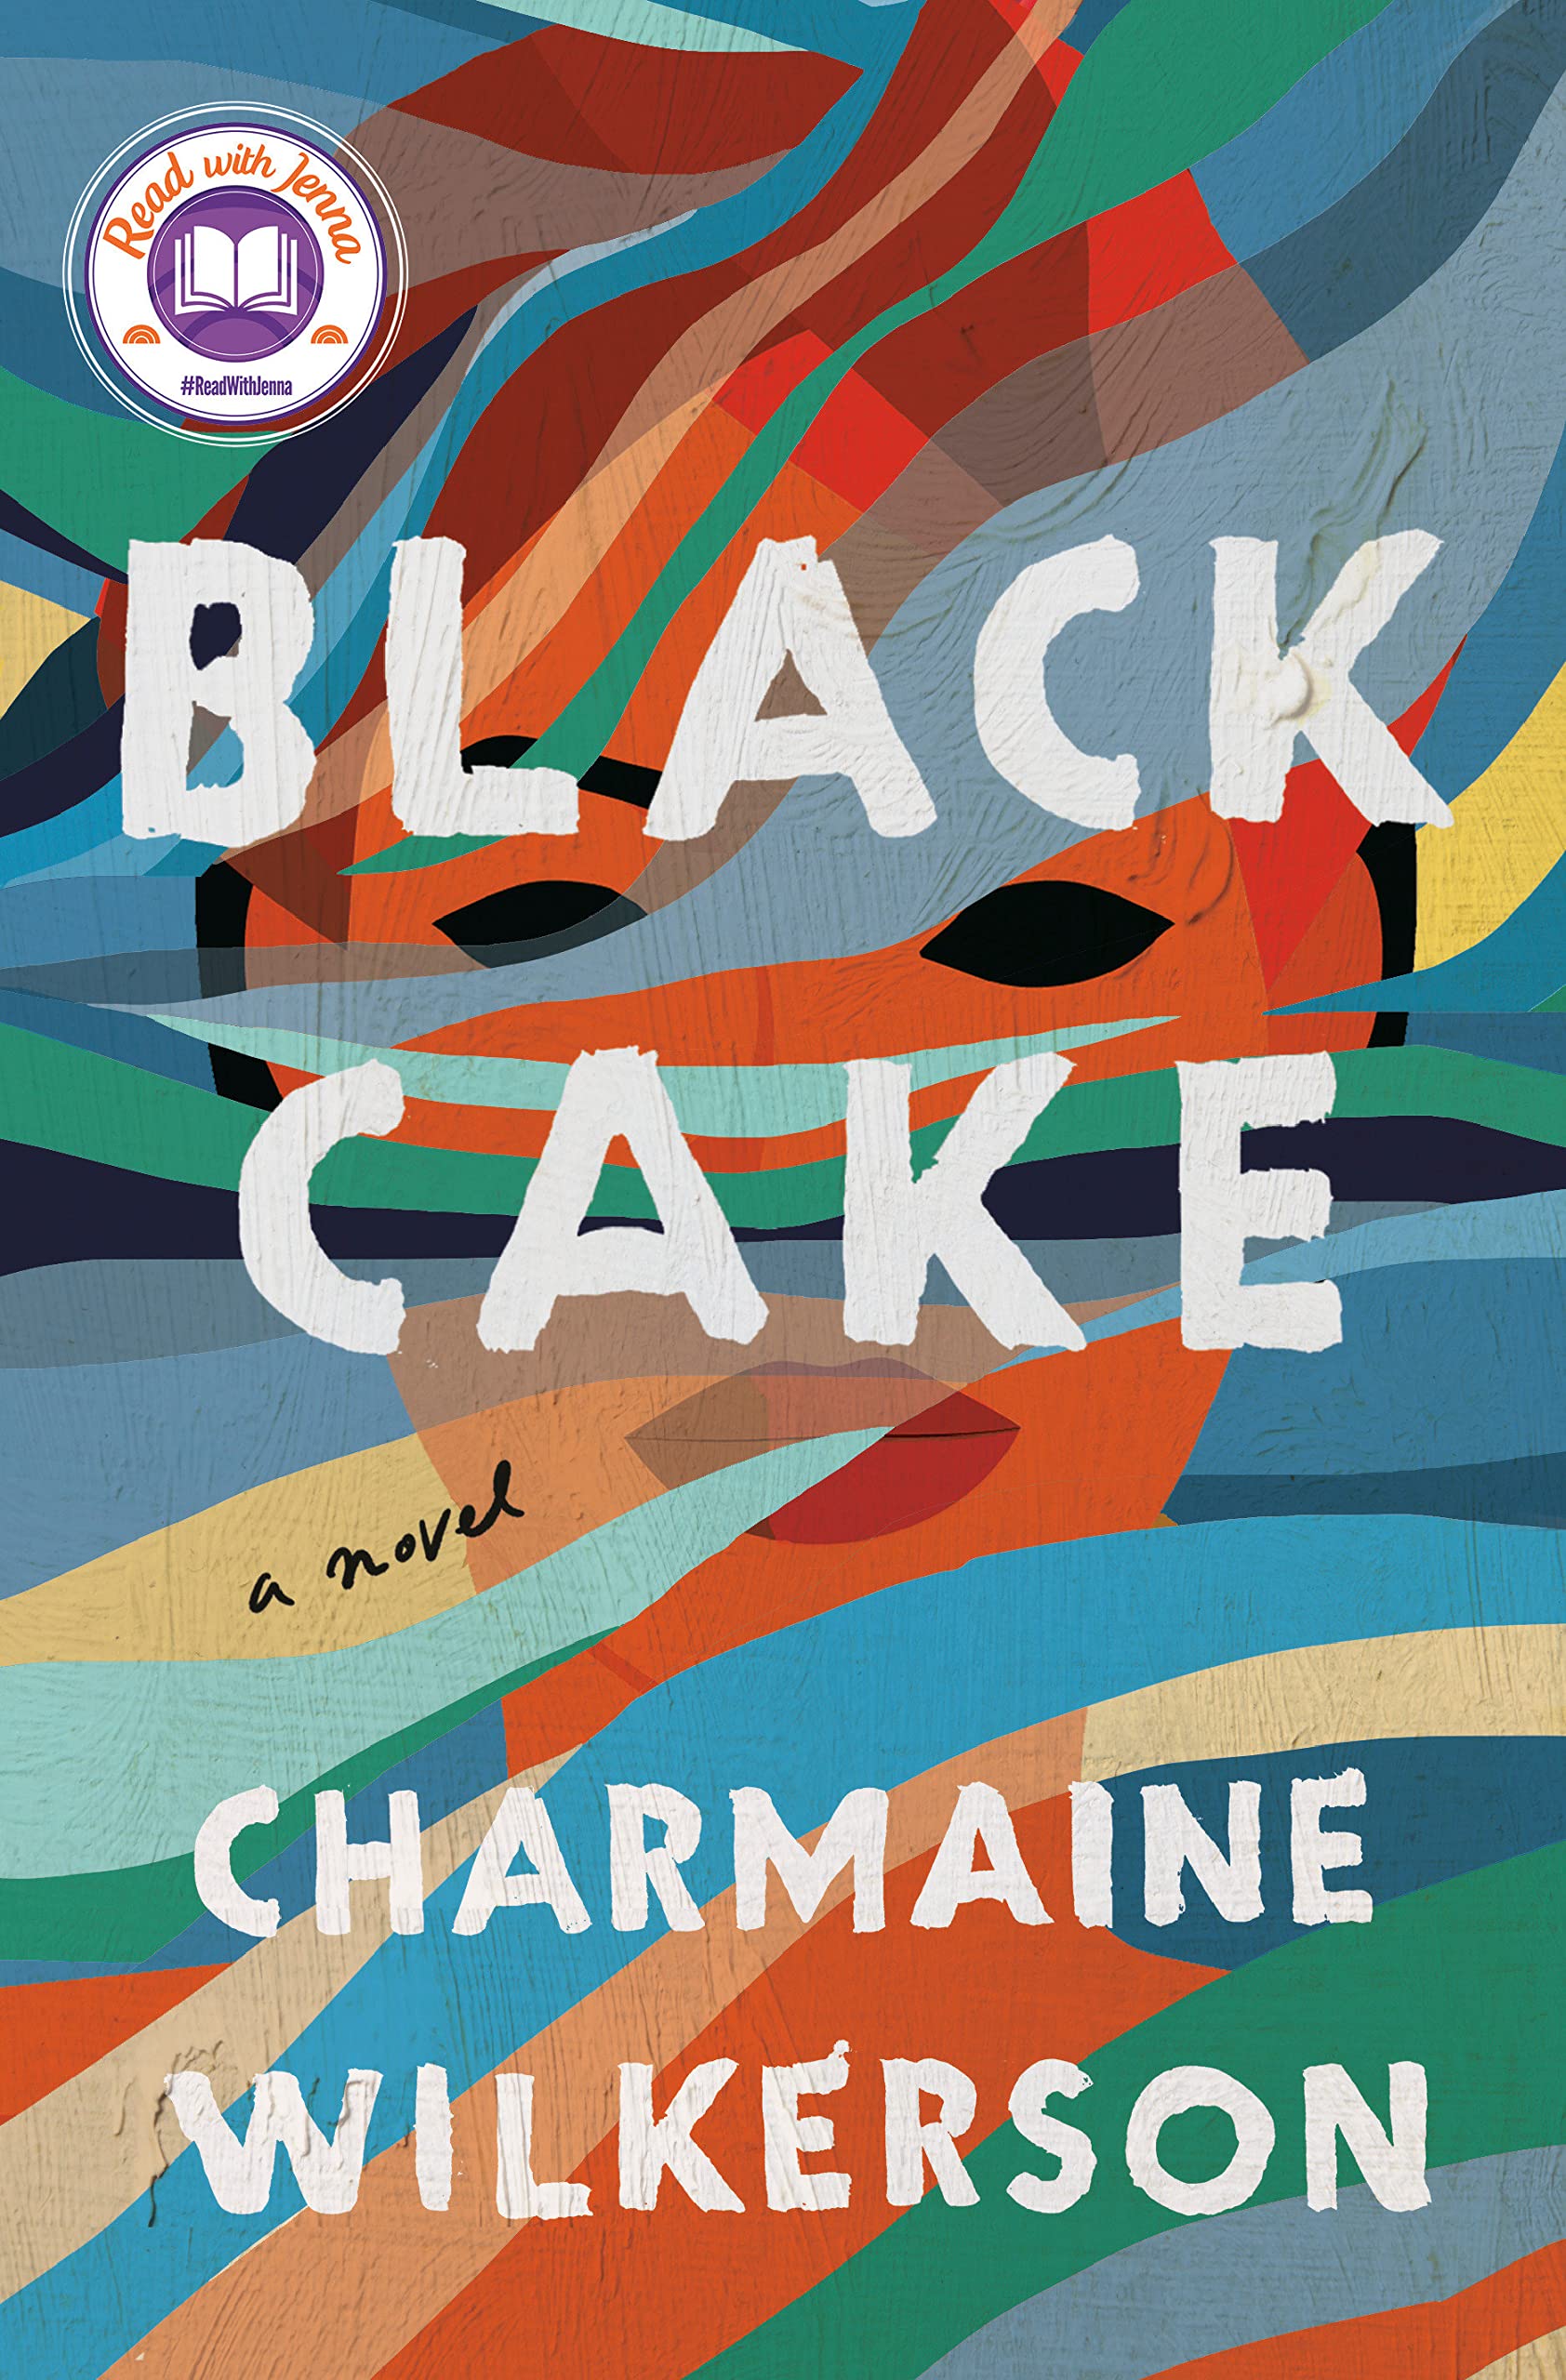 Cover of Black Cake by Charmaine Wilkerson